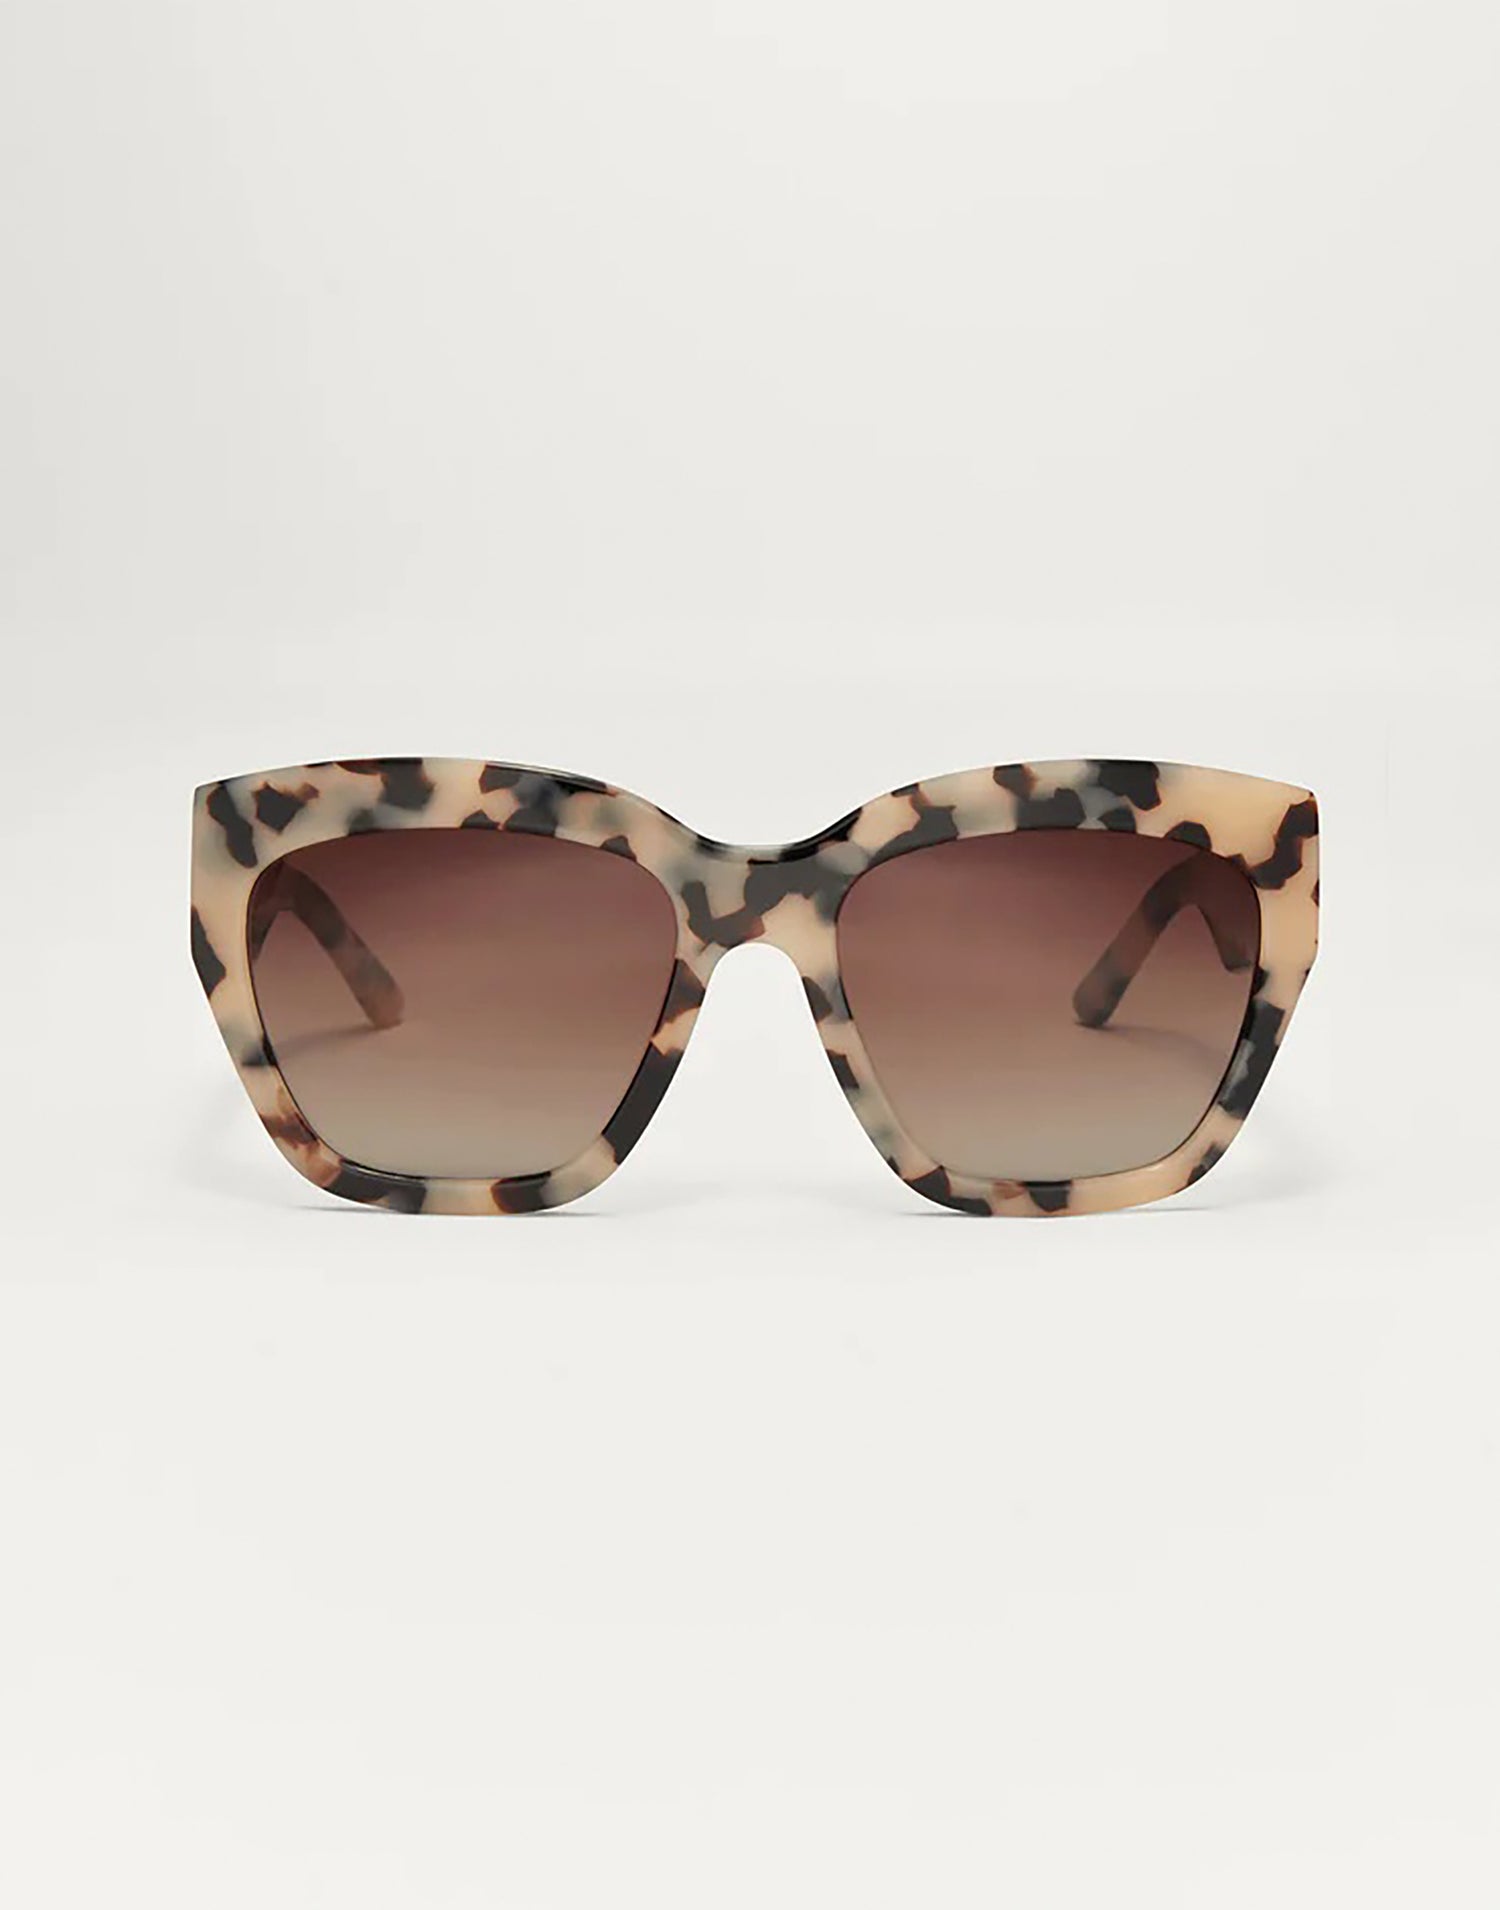 Iconic Sunglasses by Z Supply in Brown Tortoise - Front View